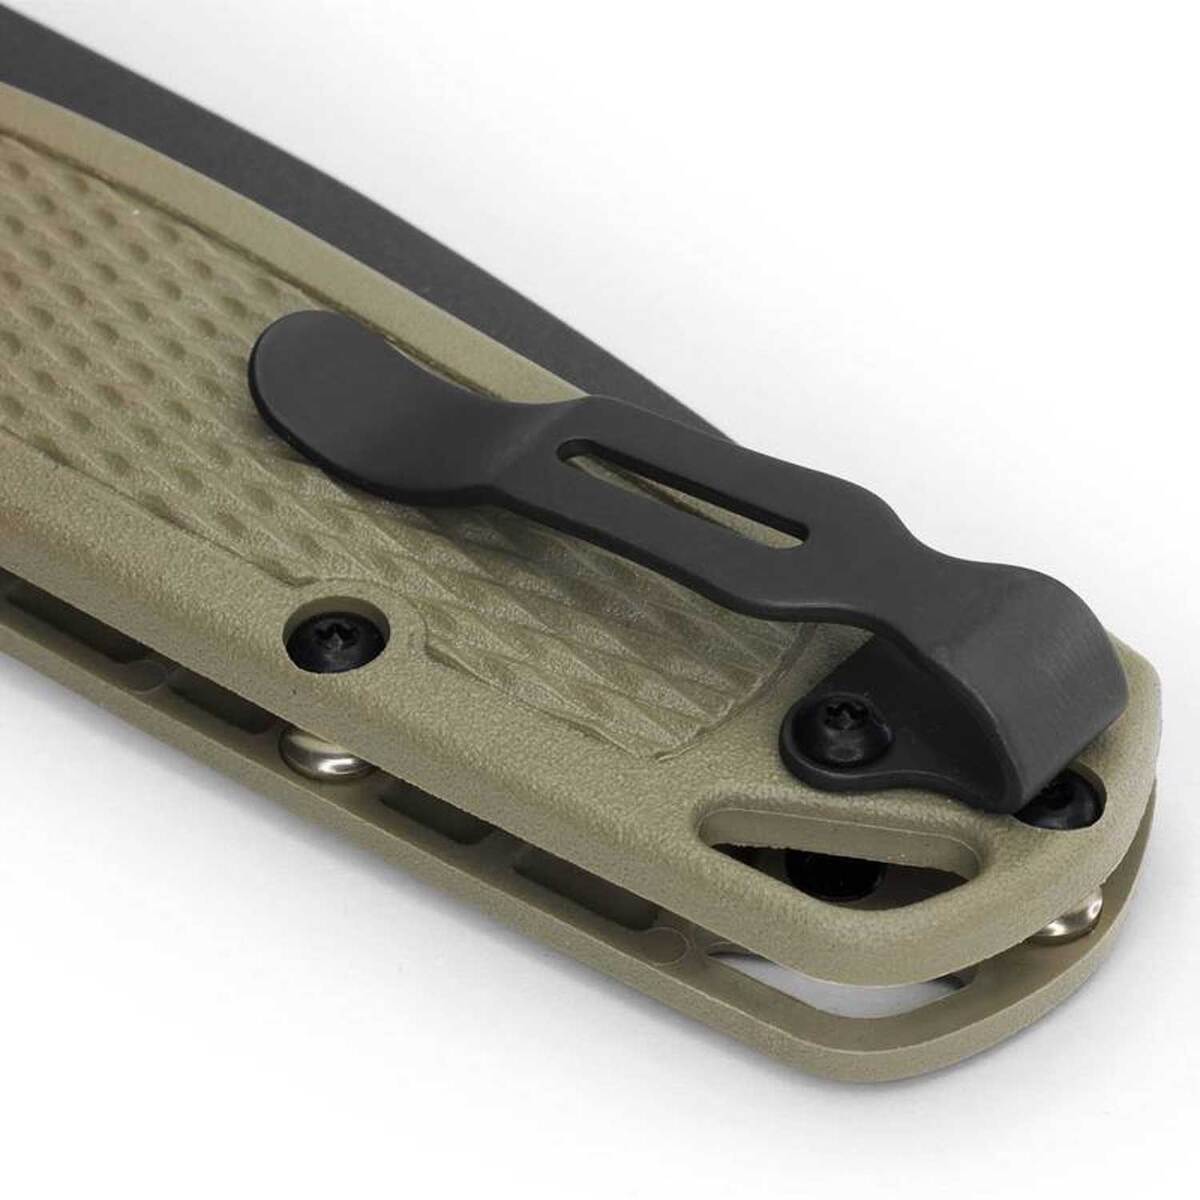 Benchmade Bugout 3.24 inch Folding Knife | Sportsman's Warehouse